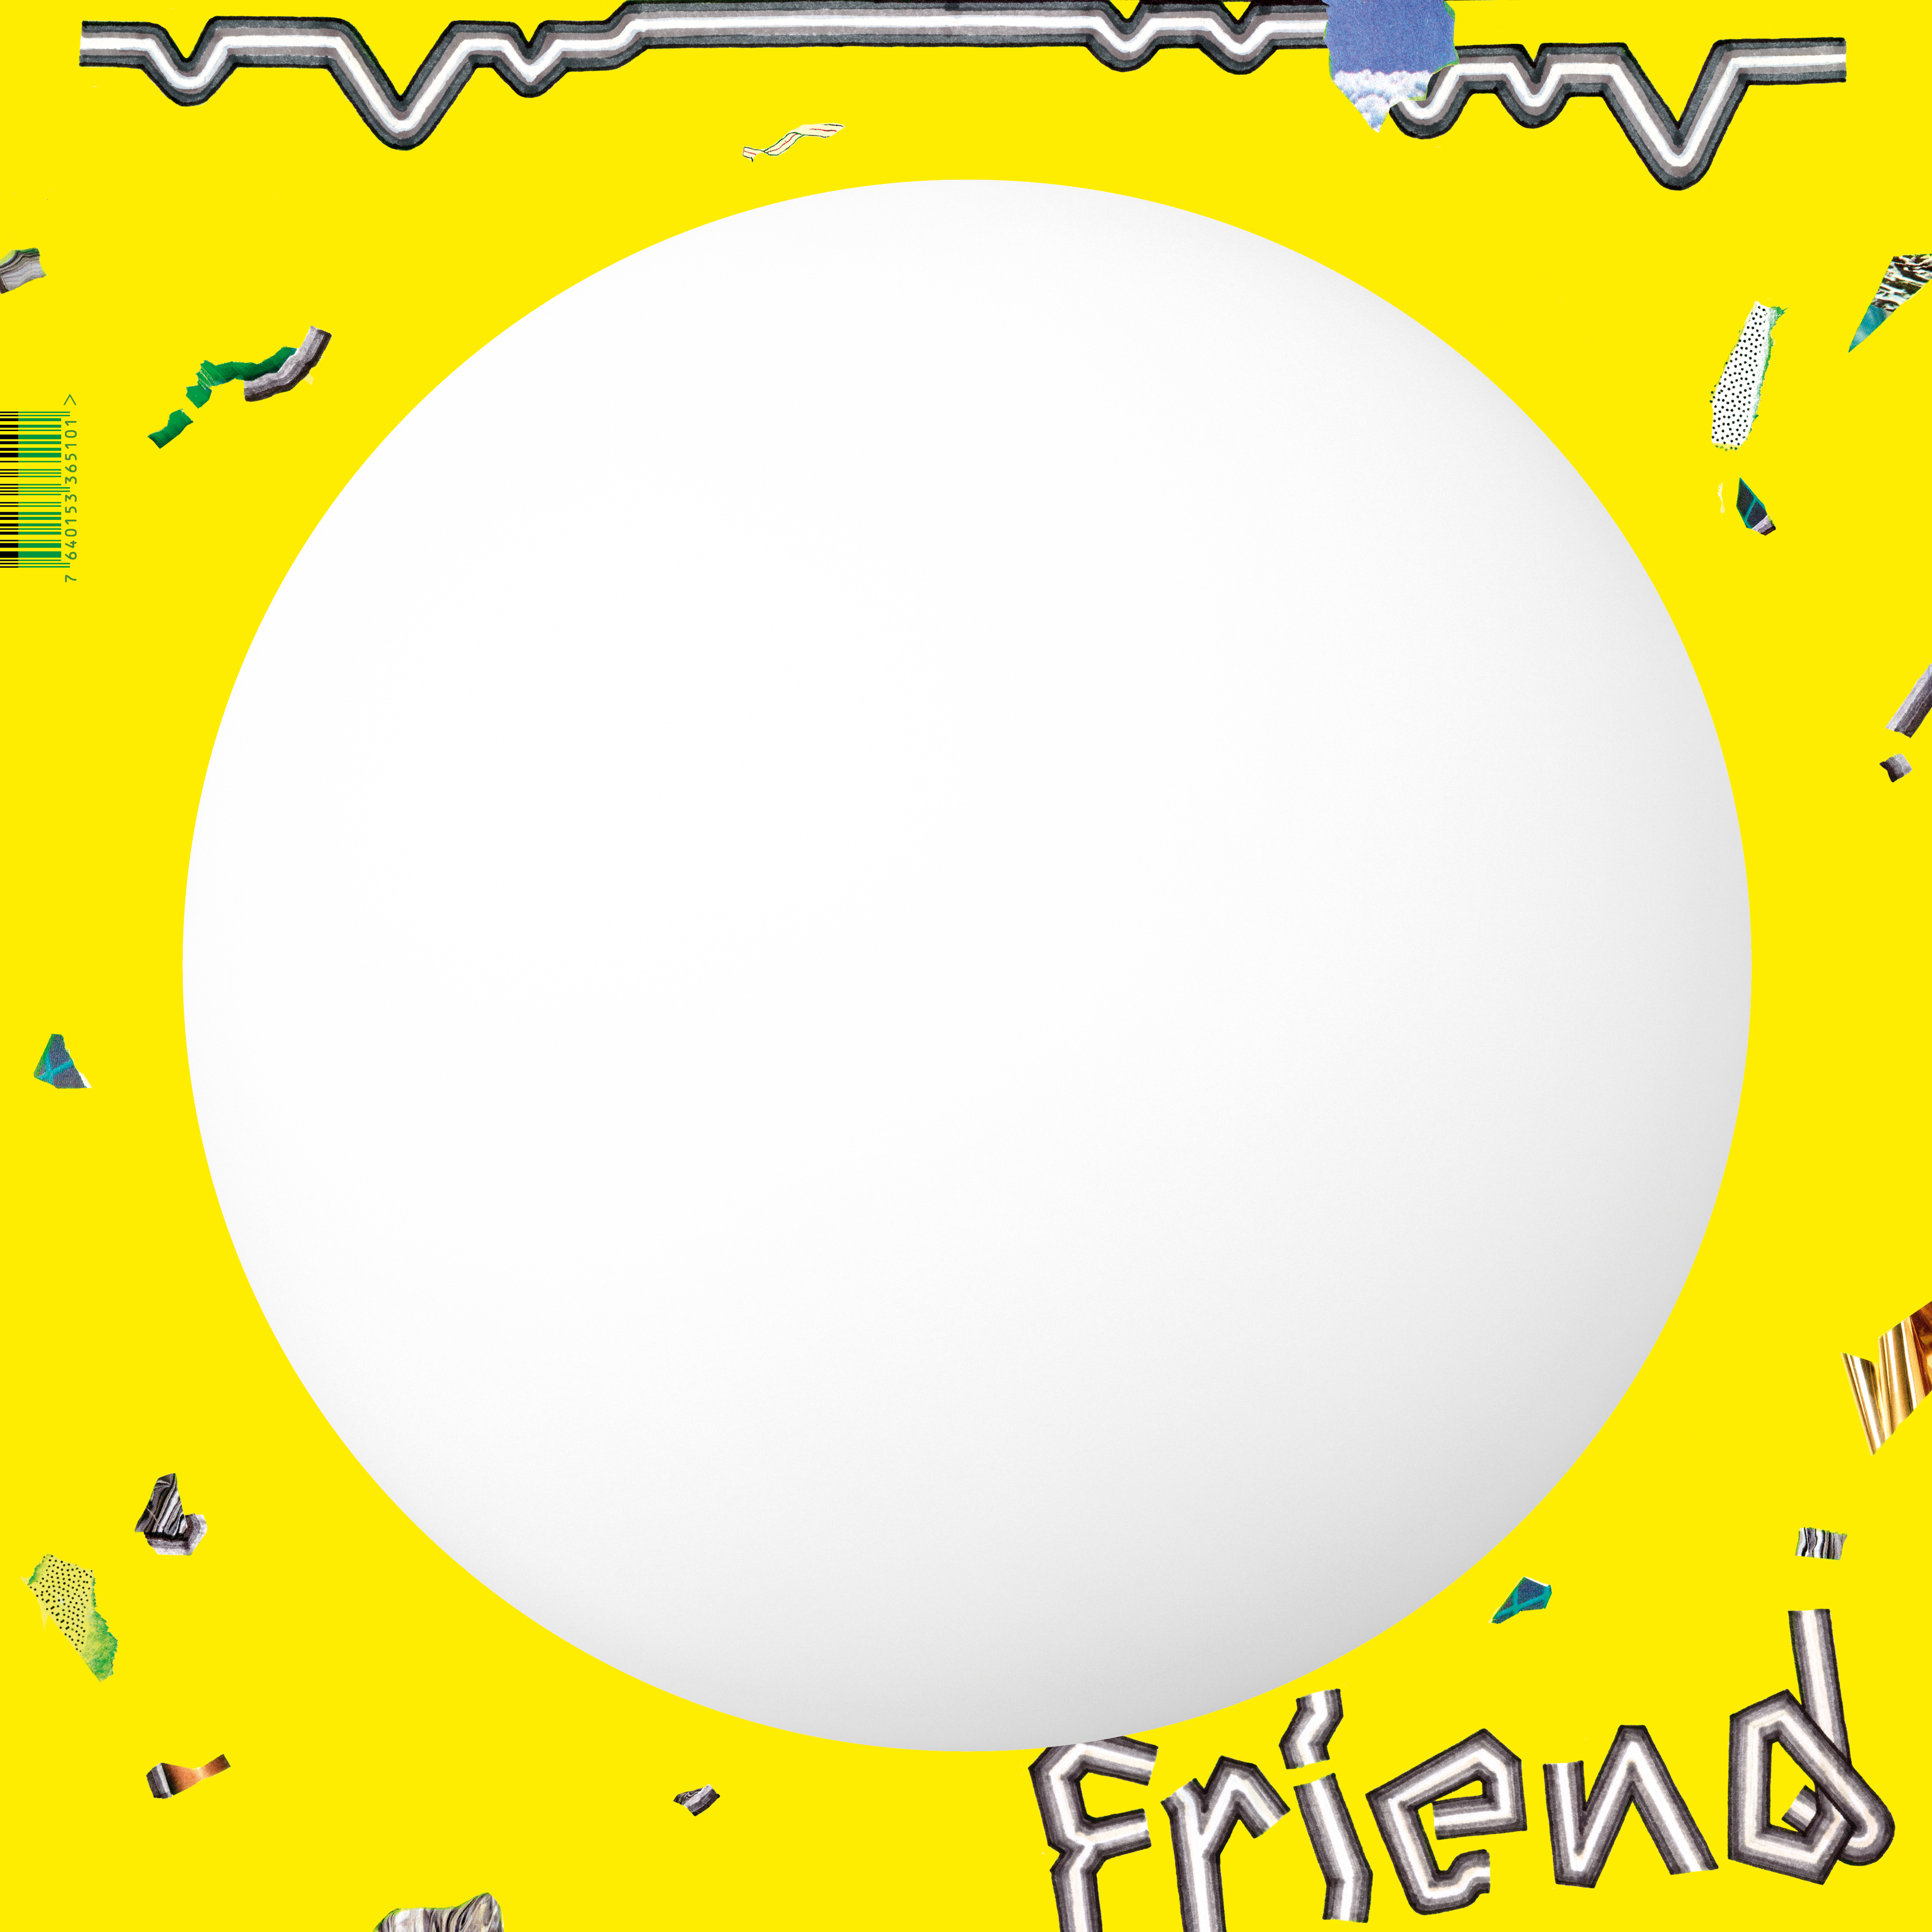 Friend – In the Teeth of the Wind